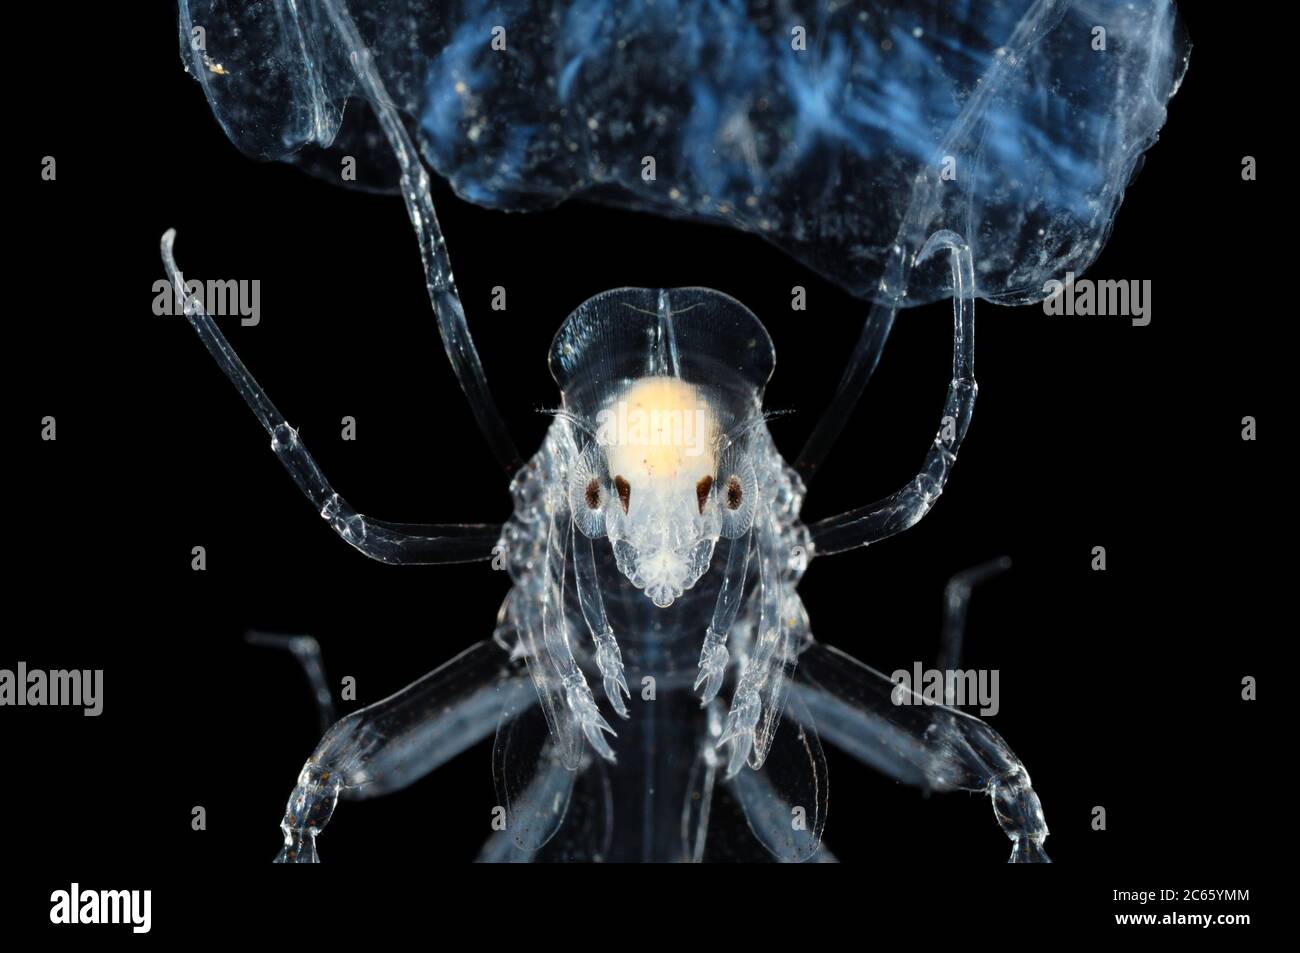 Pram bug amphipod (Phronima sp.) with young in a salp house. Phronima, the pram bug amphipod, is a small, translucent deep-sea hyperiid amphipod of the family Phronimidae. Stock Photo